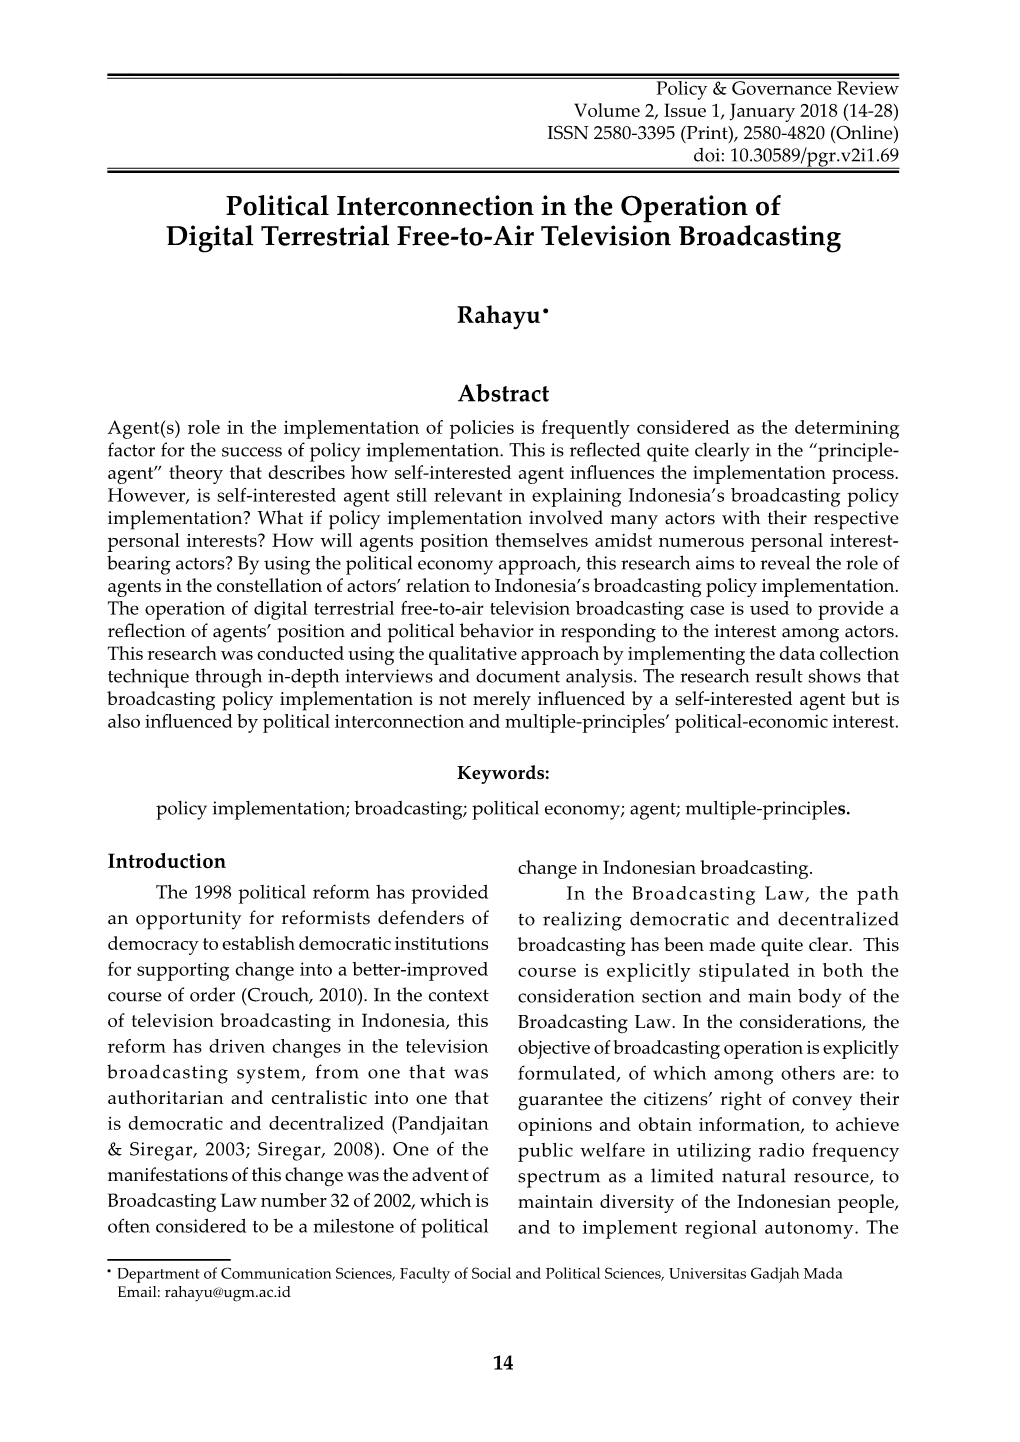 Political Interconnection in the Operation of Digital Terrestrial Free-To-Air Television Broadcasting